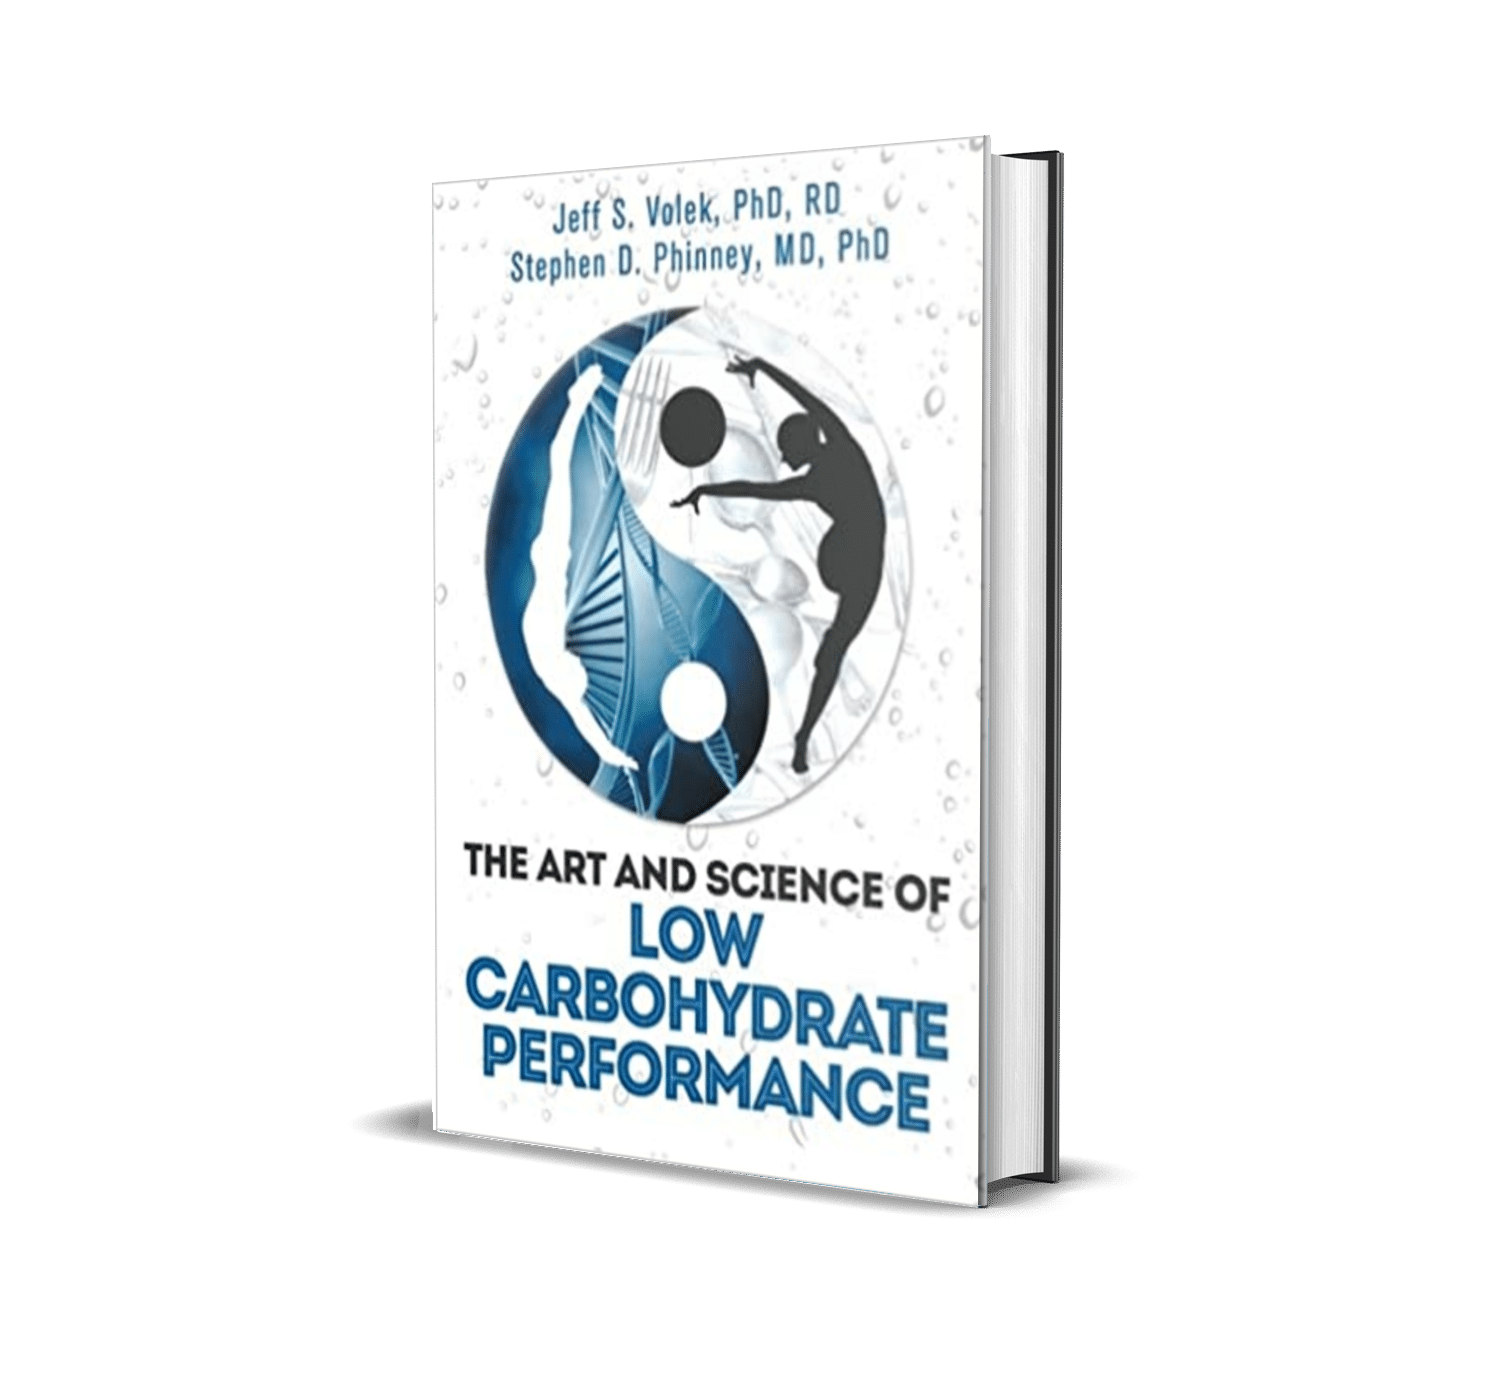 The Art and Science of Low carbohydrate performance